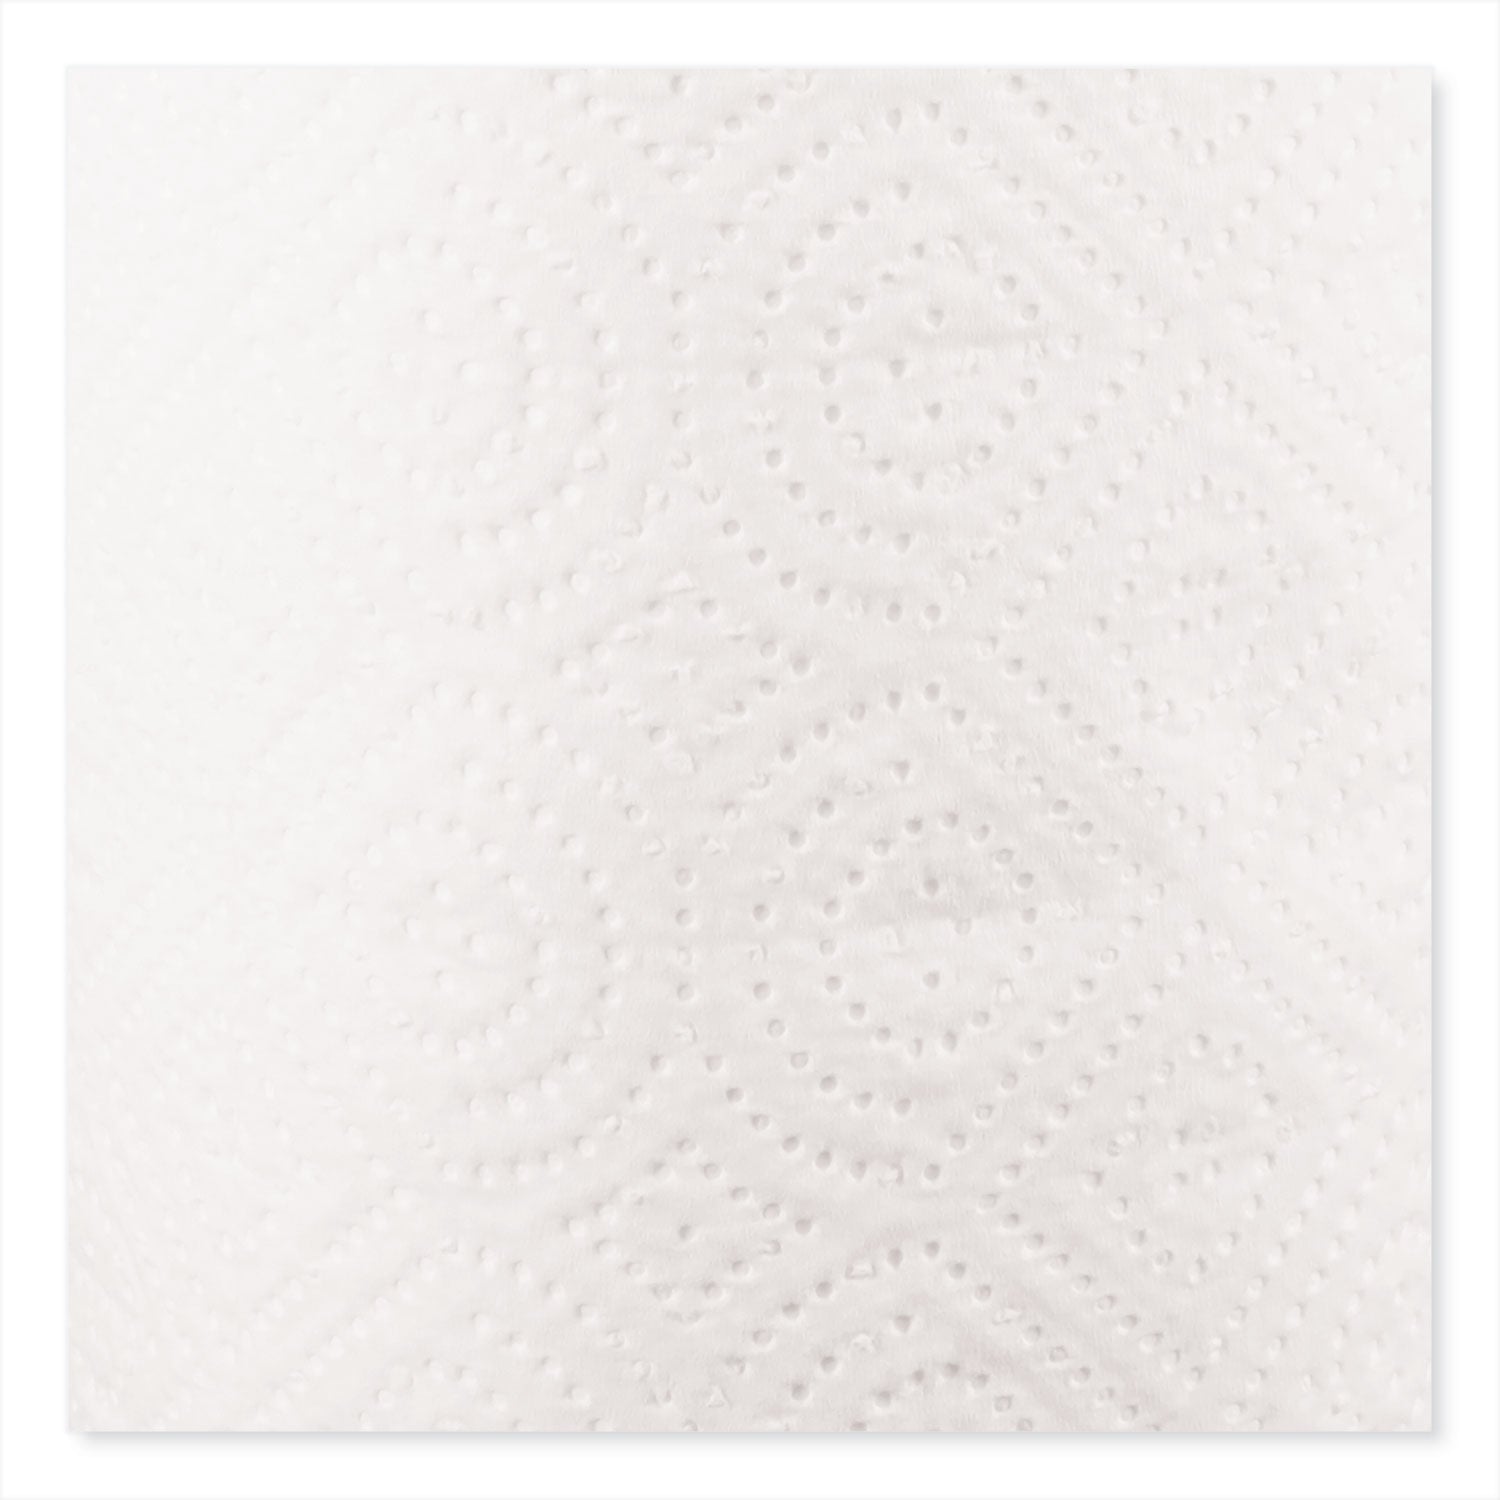 Kitchen Roll Towels, 2-Ply, 11 x 8.5, White, 85/Roll - 